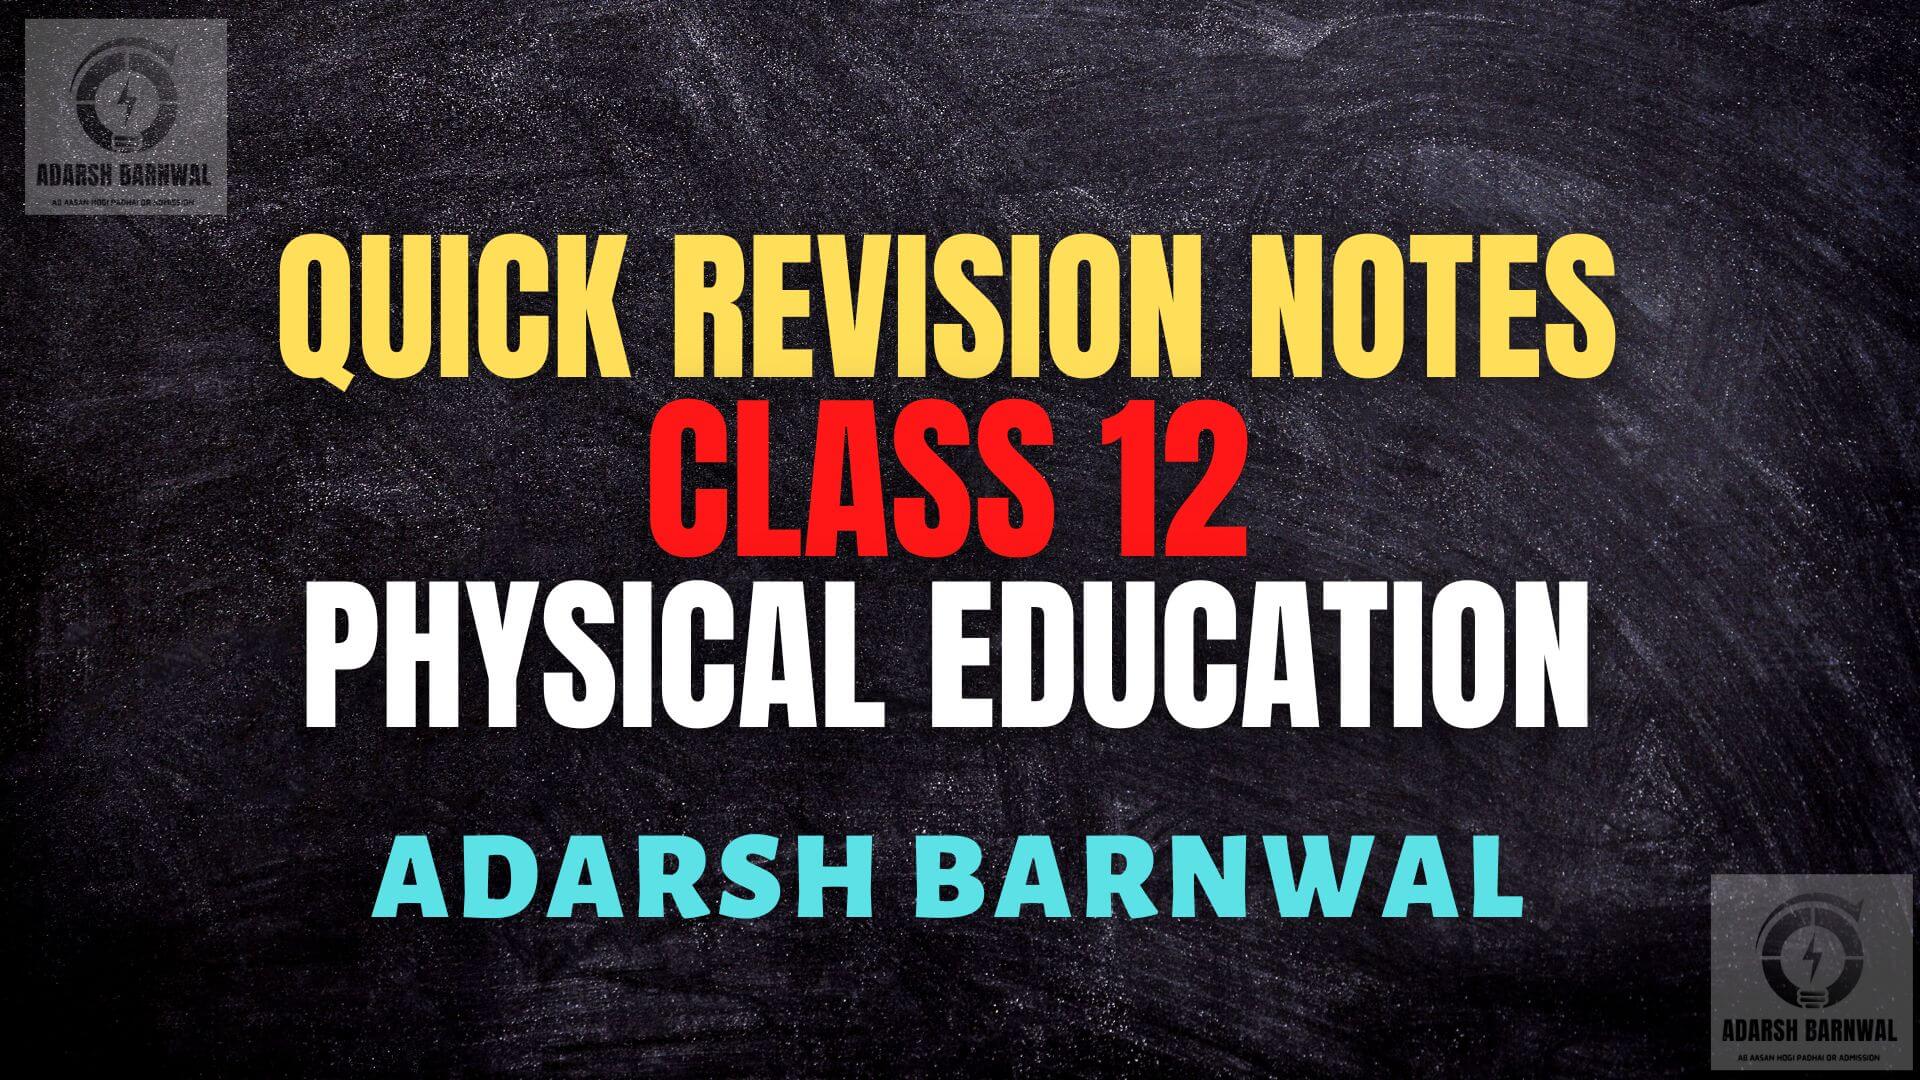 Class 12 Physical Education Quick Revision Notes by Adarsh Barnwal